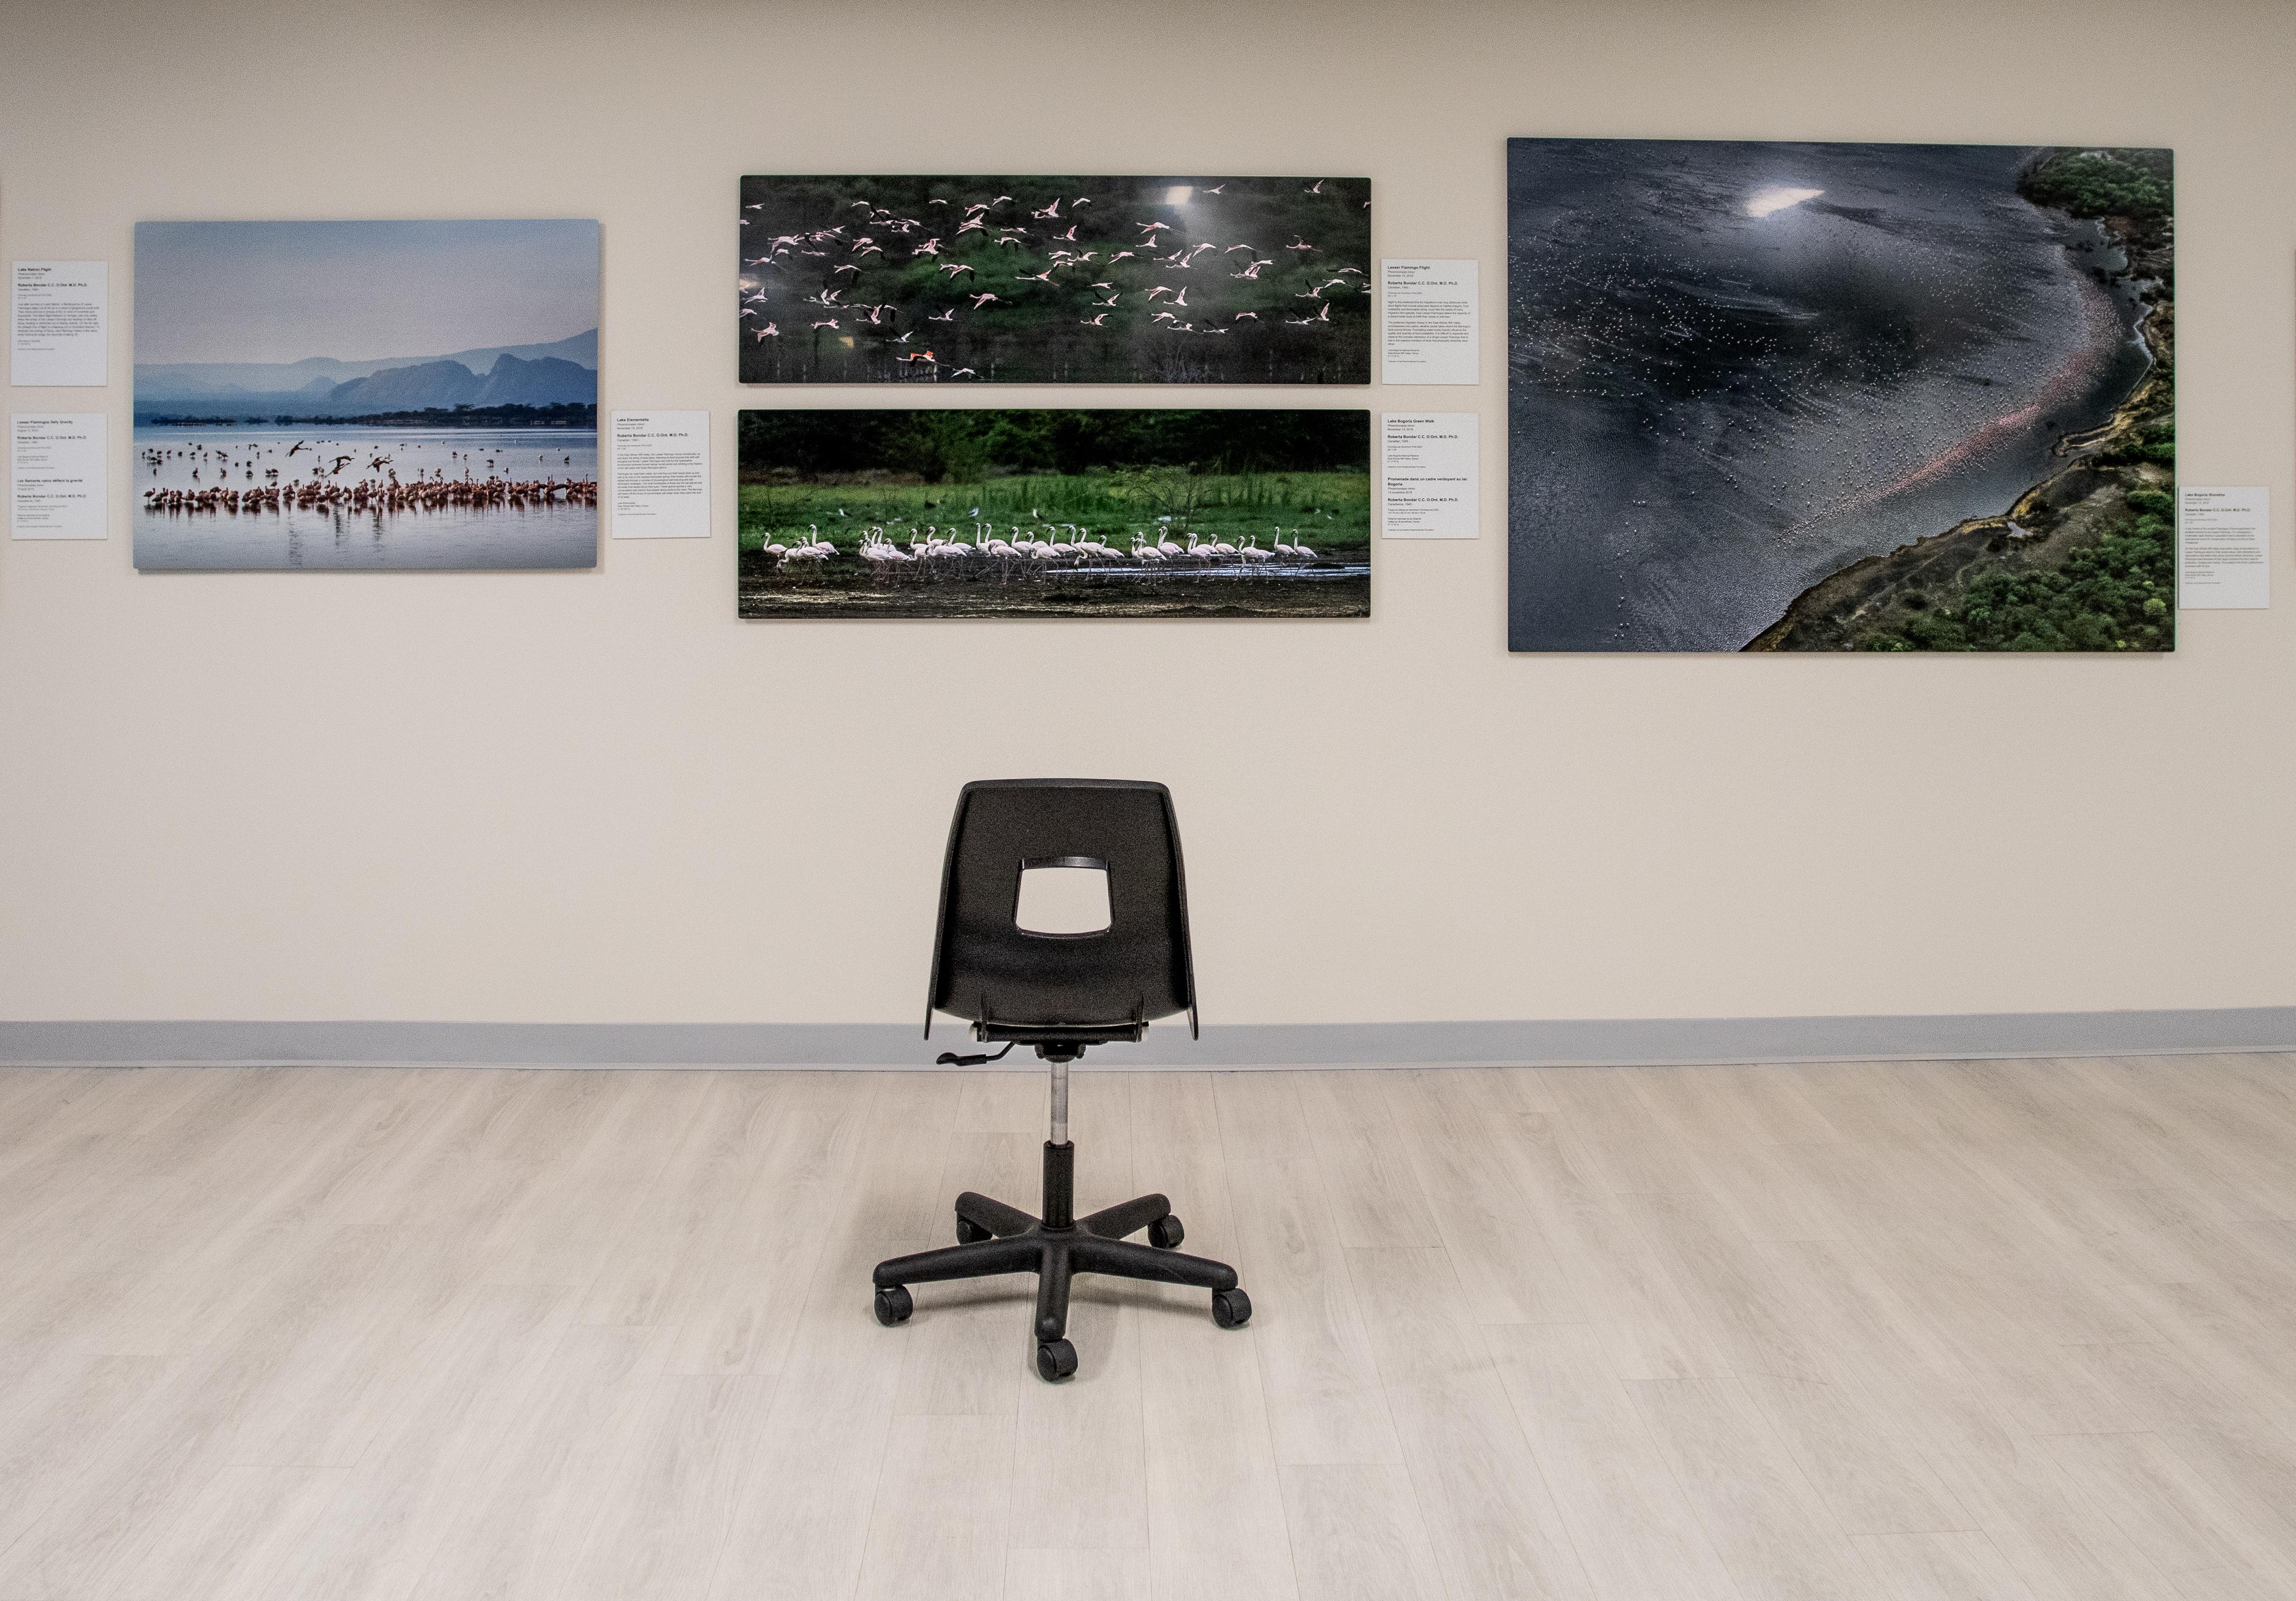 A series of photographs installed in a gallery as part of an exhibition.